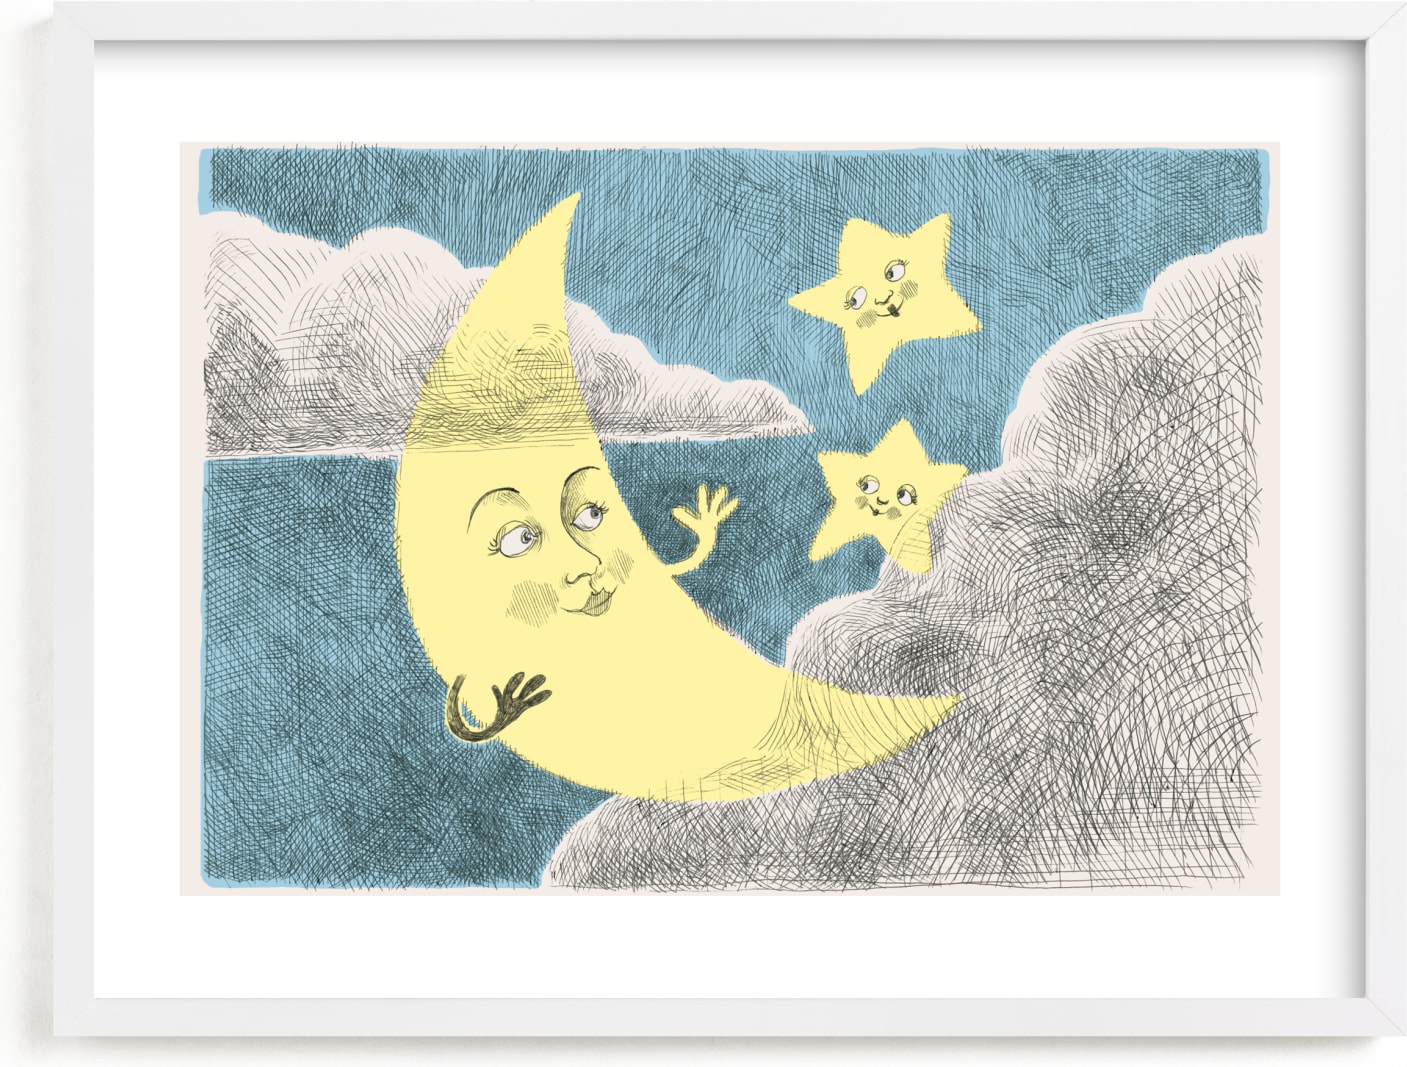 This is a blue nursery wall art by Catilustre called Claire de Lune.